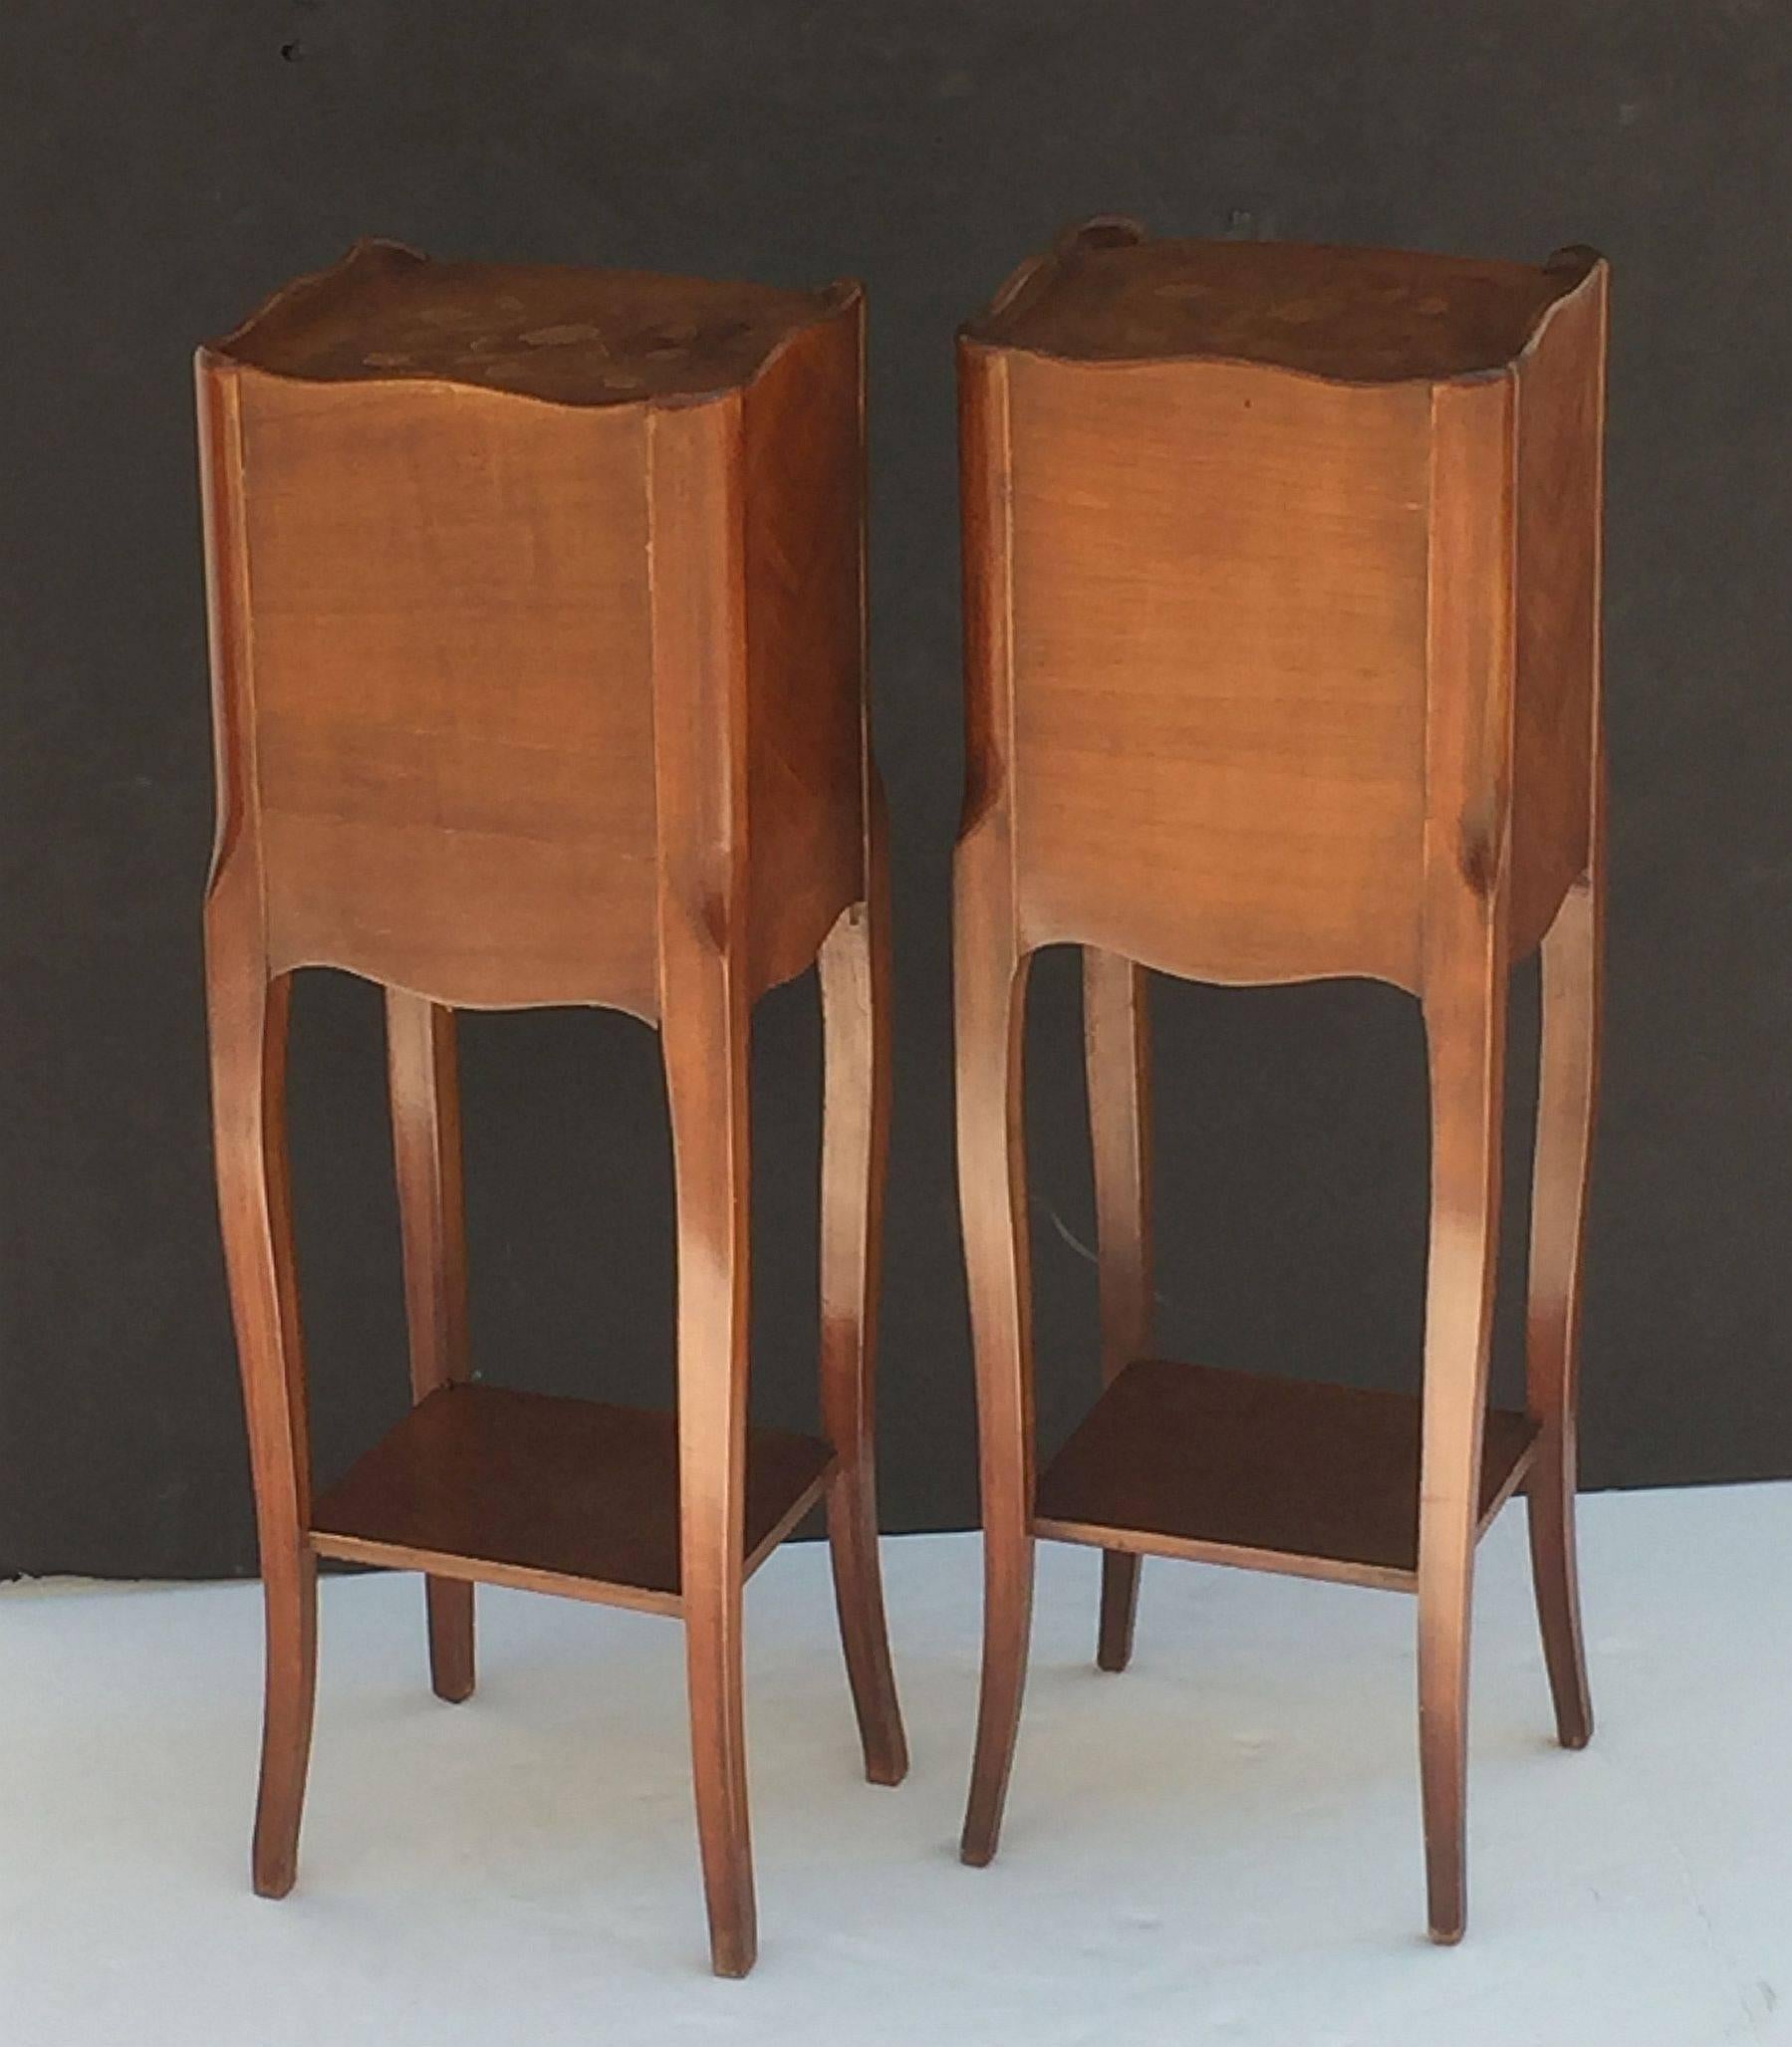 20th Century Pair of French Inlaid Nightstands or Bedside Tables